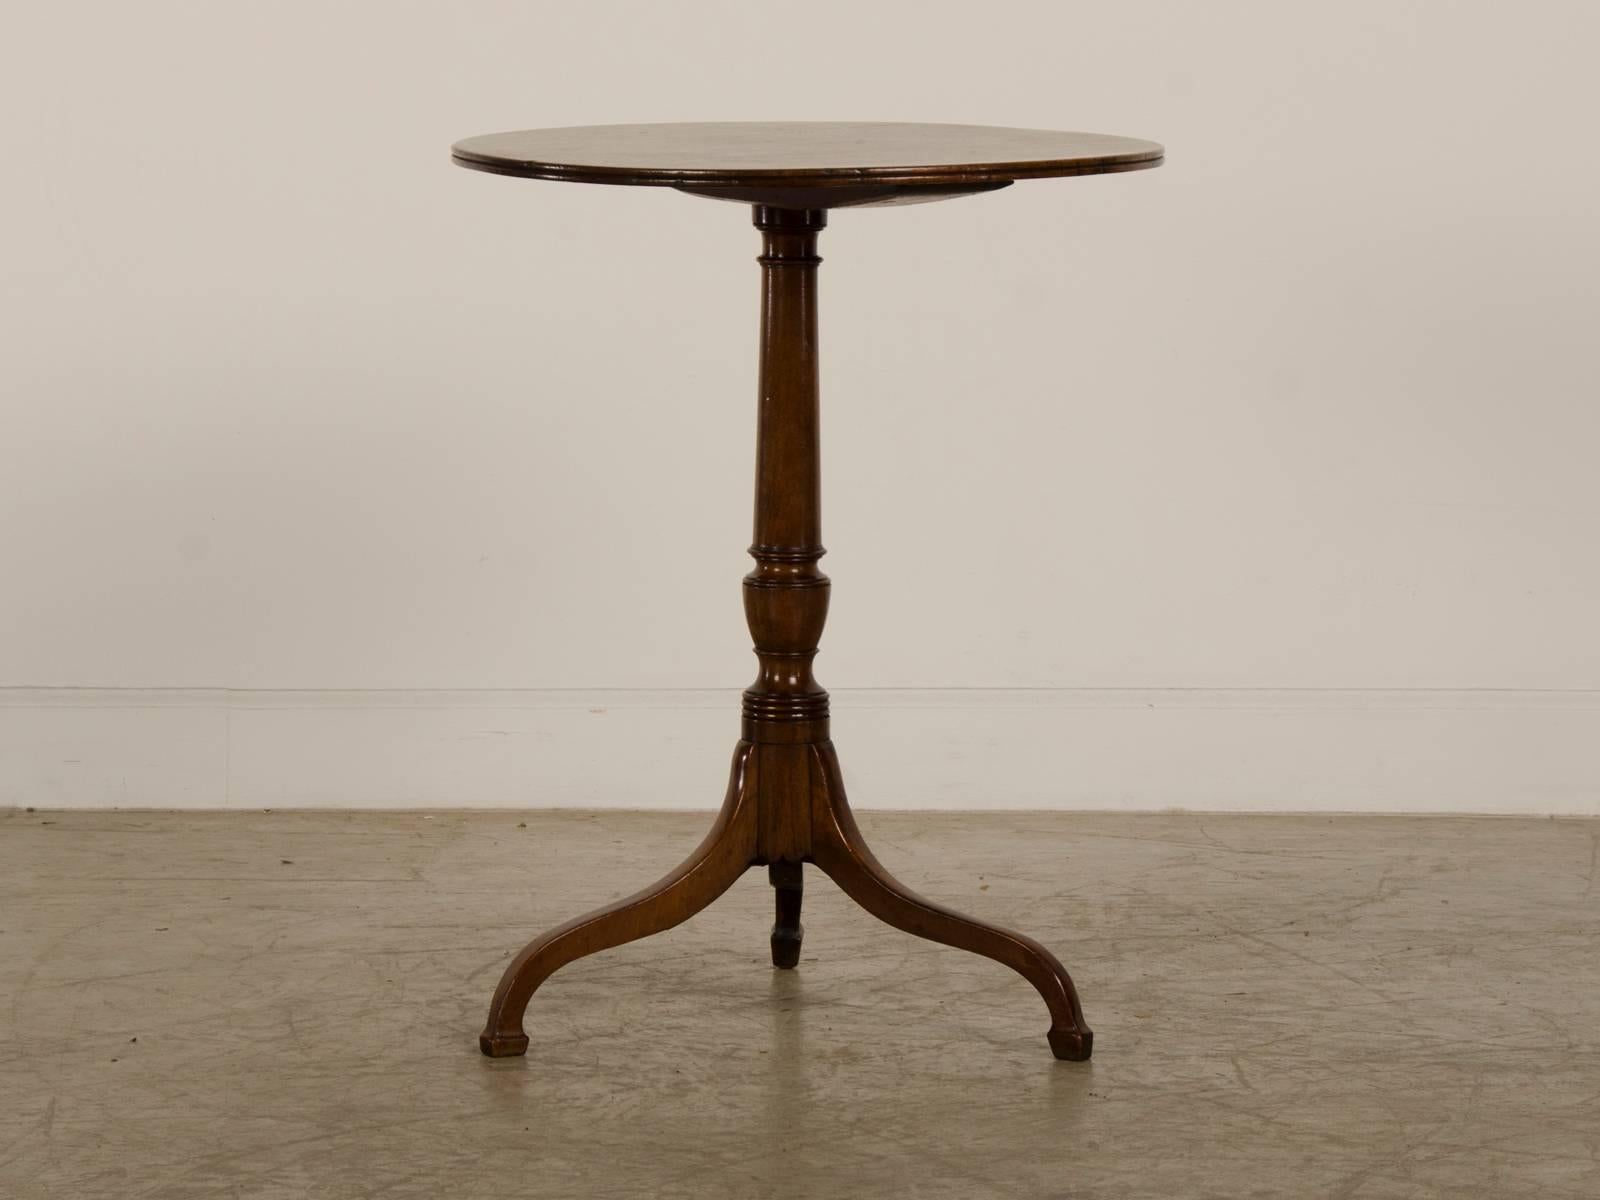 Be the first to see our new selections direct from 1stdibs! Please click on follow below.

A splendid antique English Regency period Sheraton style mahogany side table with a single board top from England, circa 1820. This supremely elegant table